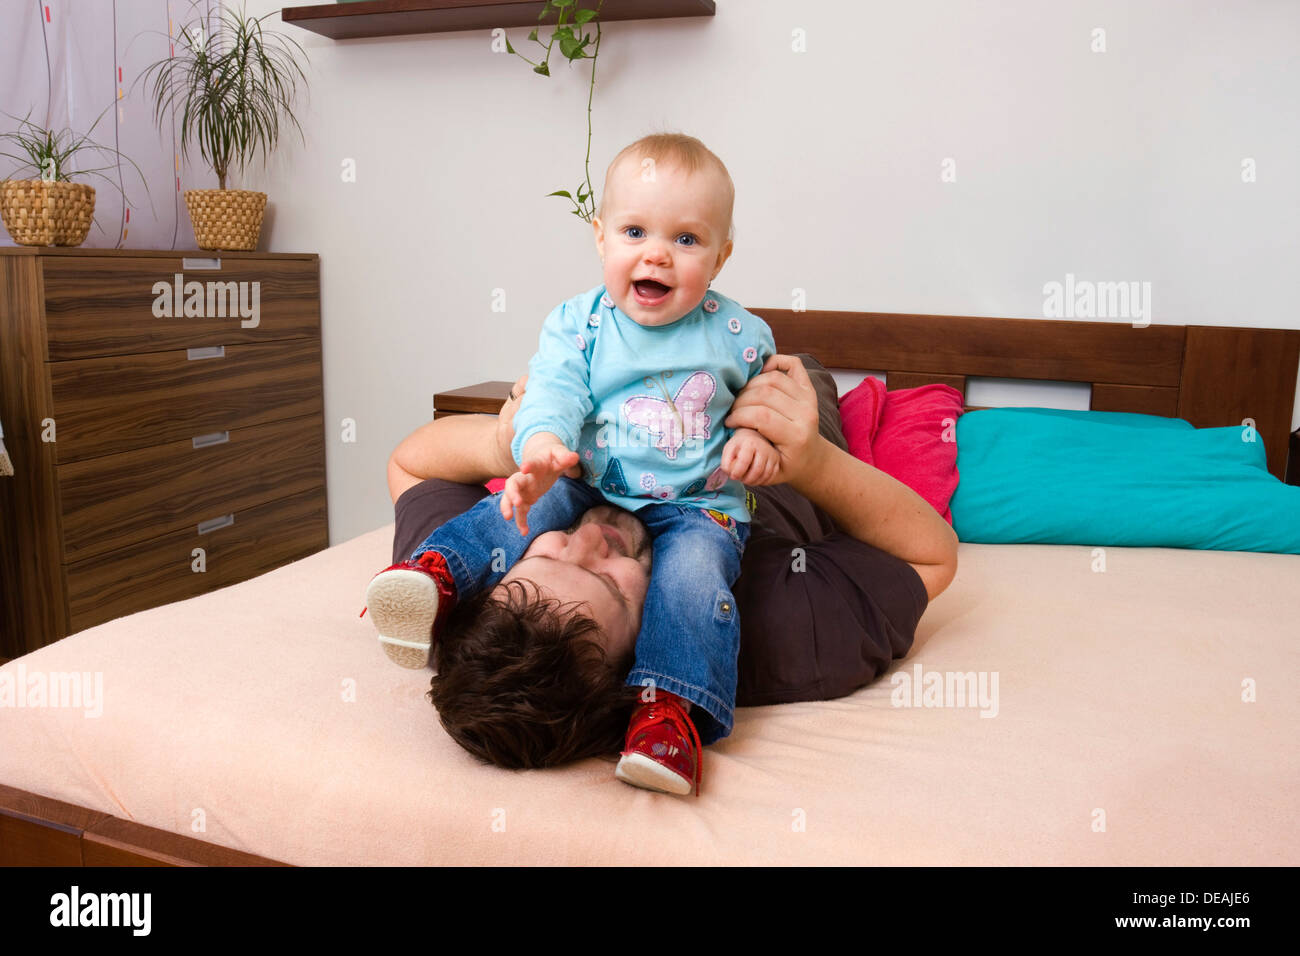 Father, 32 years, playing with baby, 1 year Stock Photo